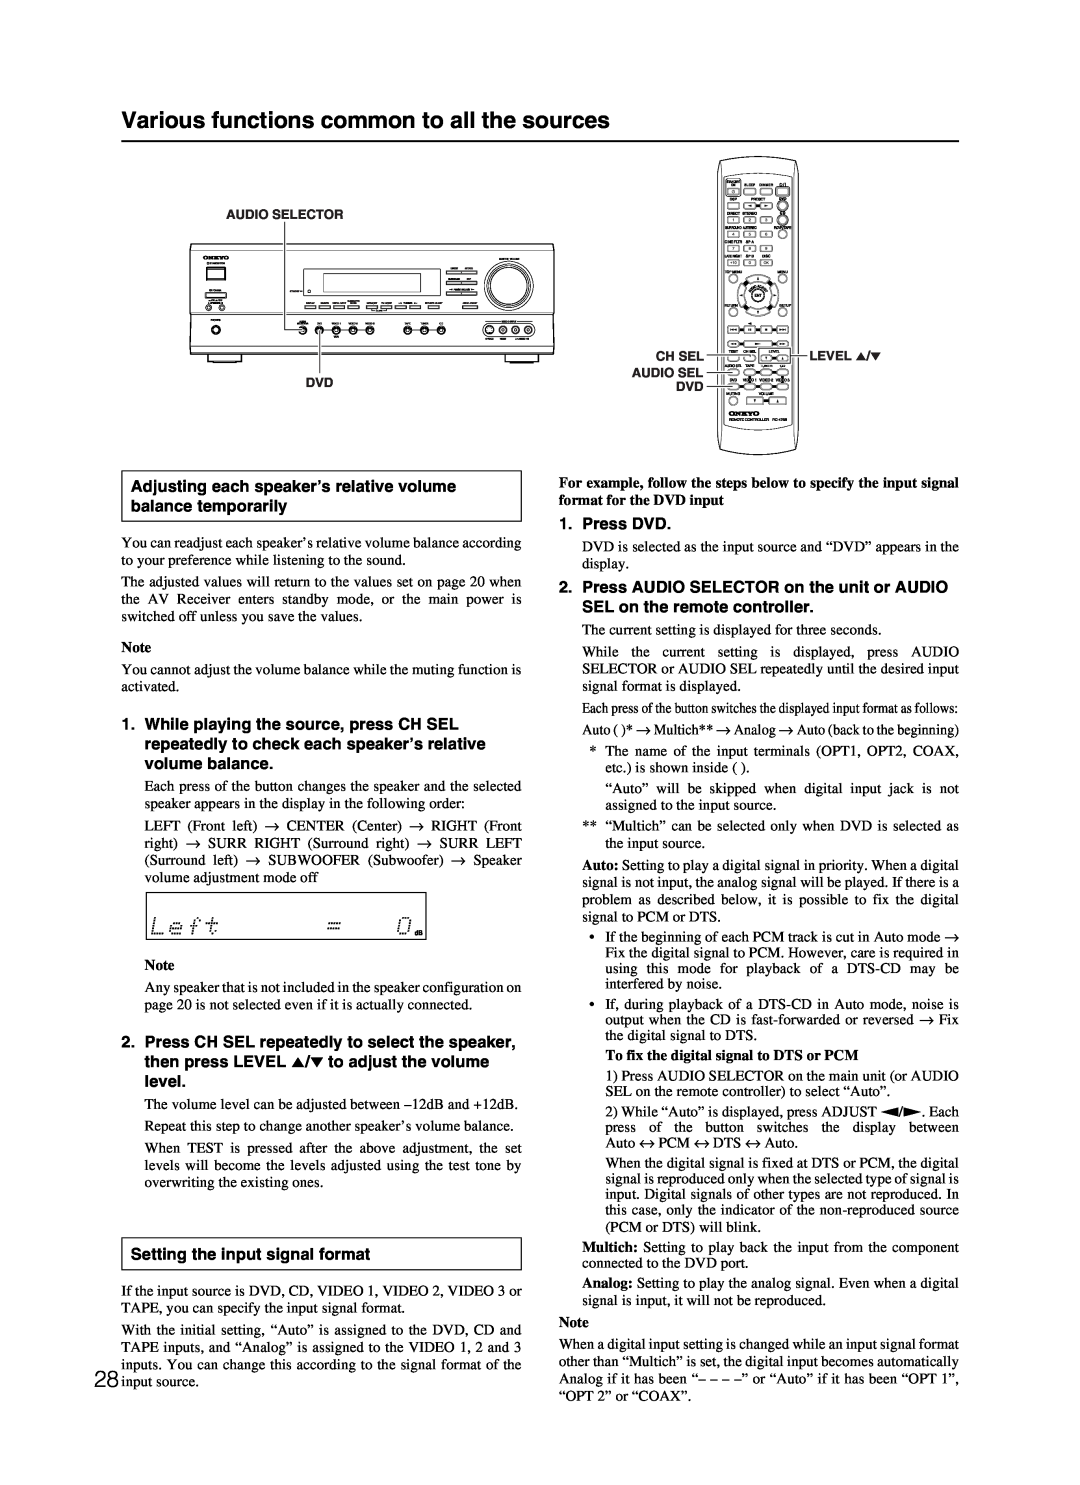 Onkyo TX-SR500 appendix Various functions common to all the sources, Setting the input signal format 